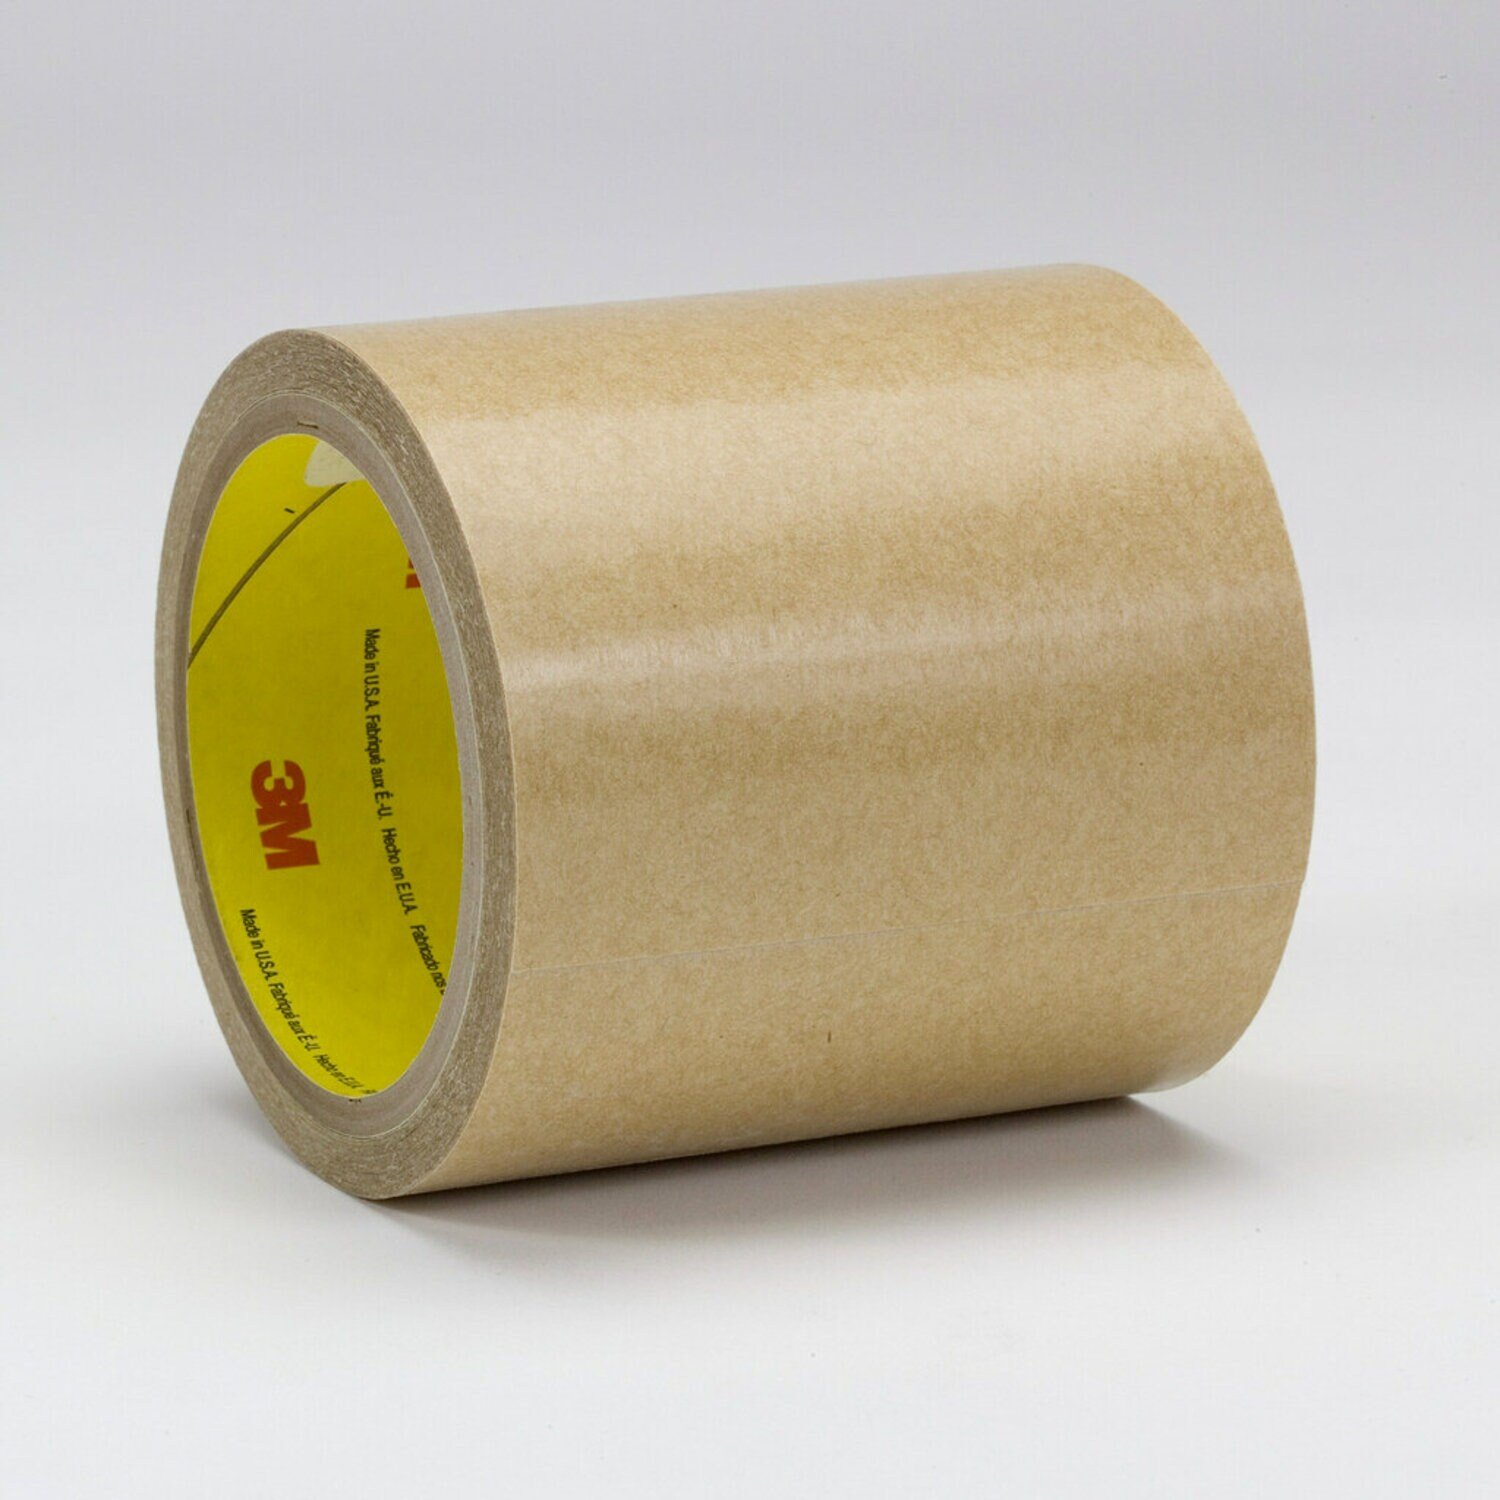 7000123305 - 3M Adhesive Transfer Tape 950, Clear, 3 in x 60 yd, 5 mil, 12 rolls per
case